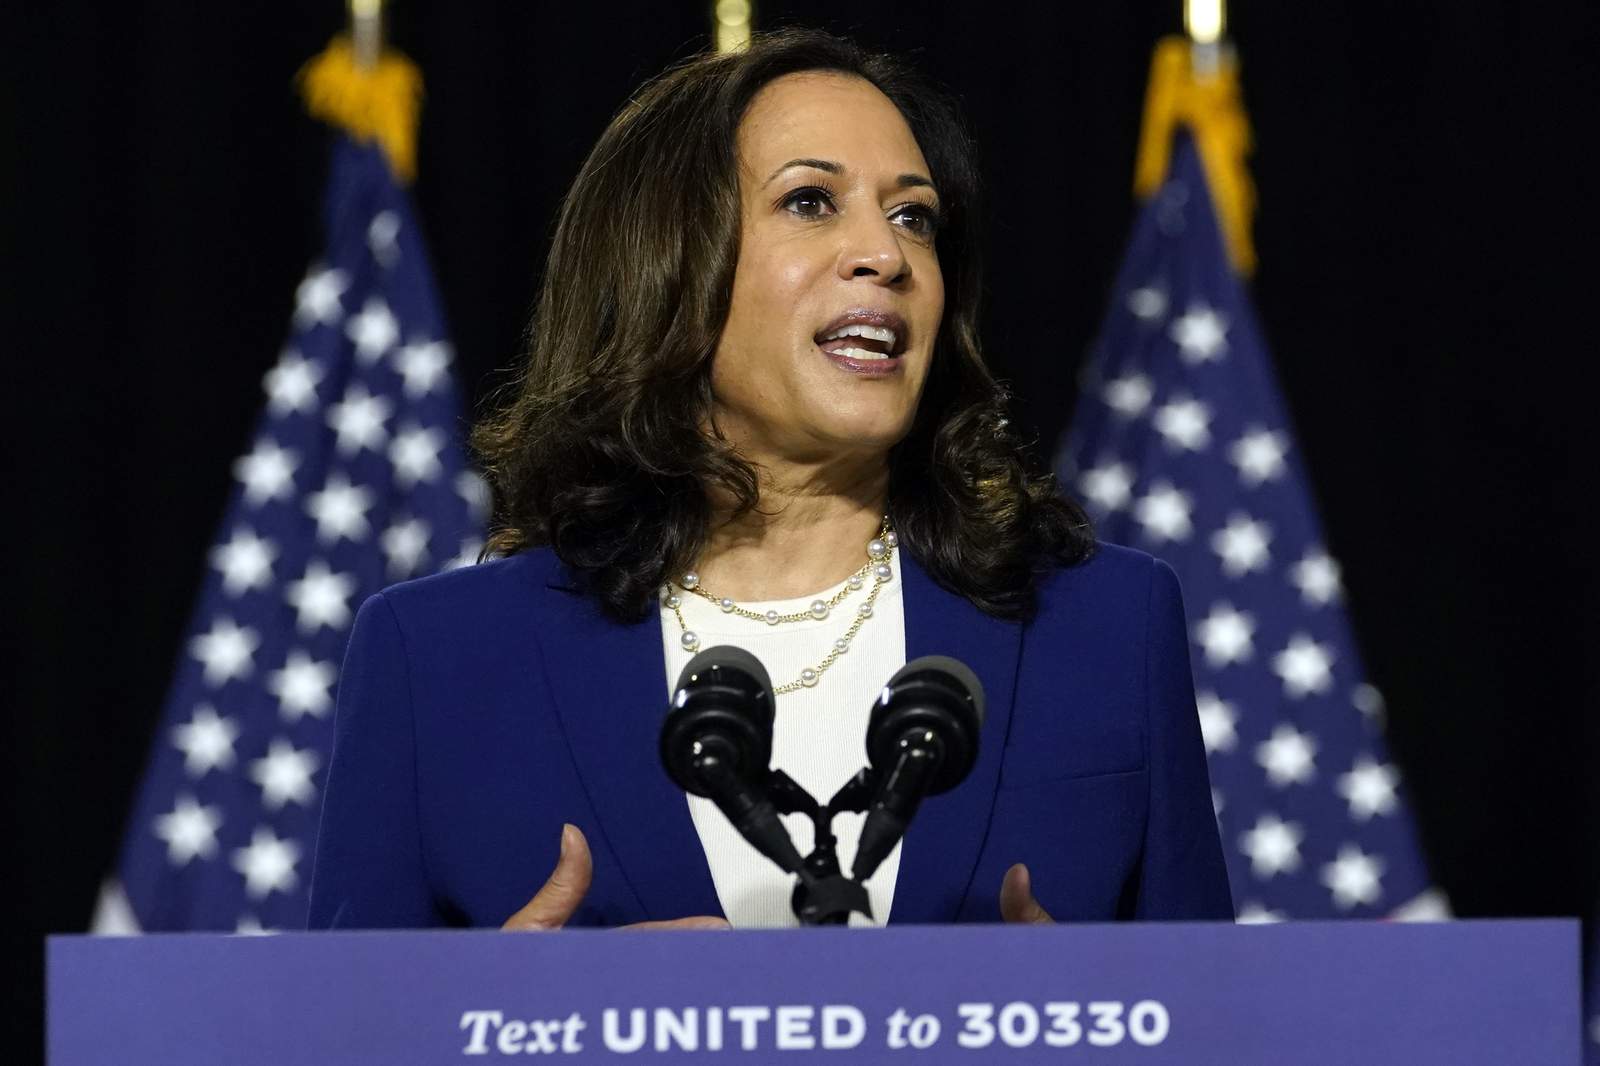 Harris prepares to make history with VP acceptance speech